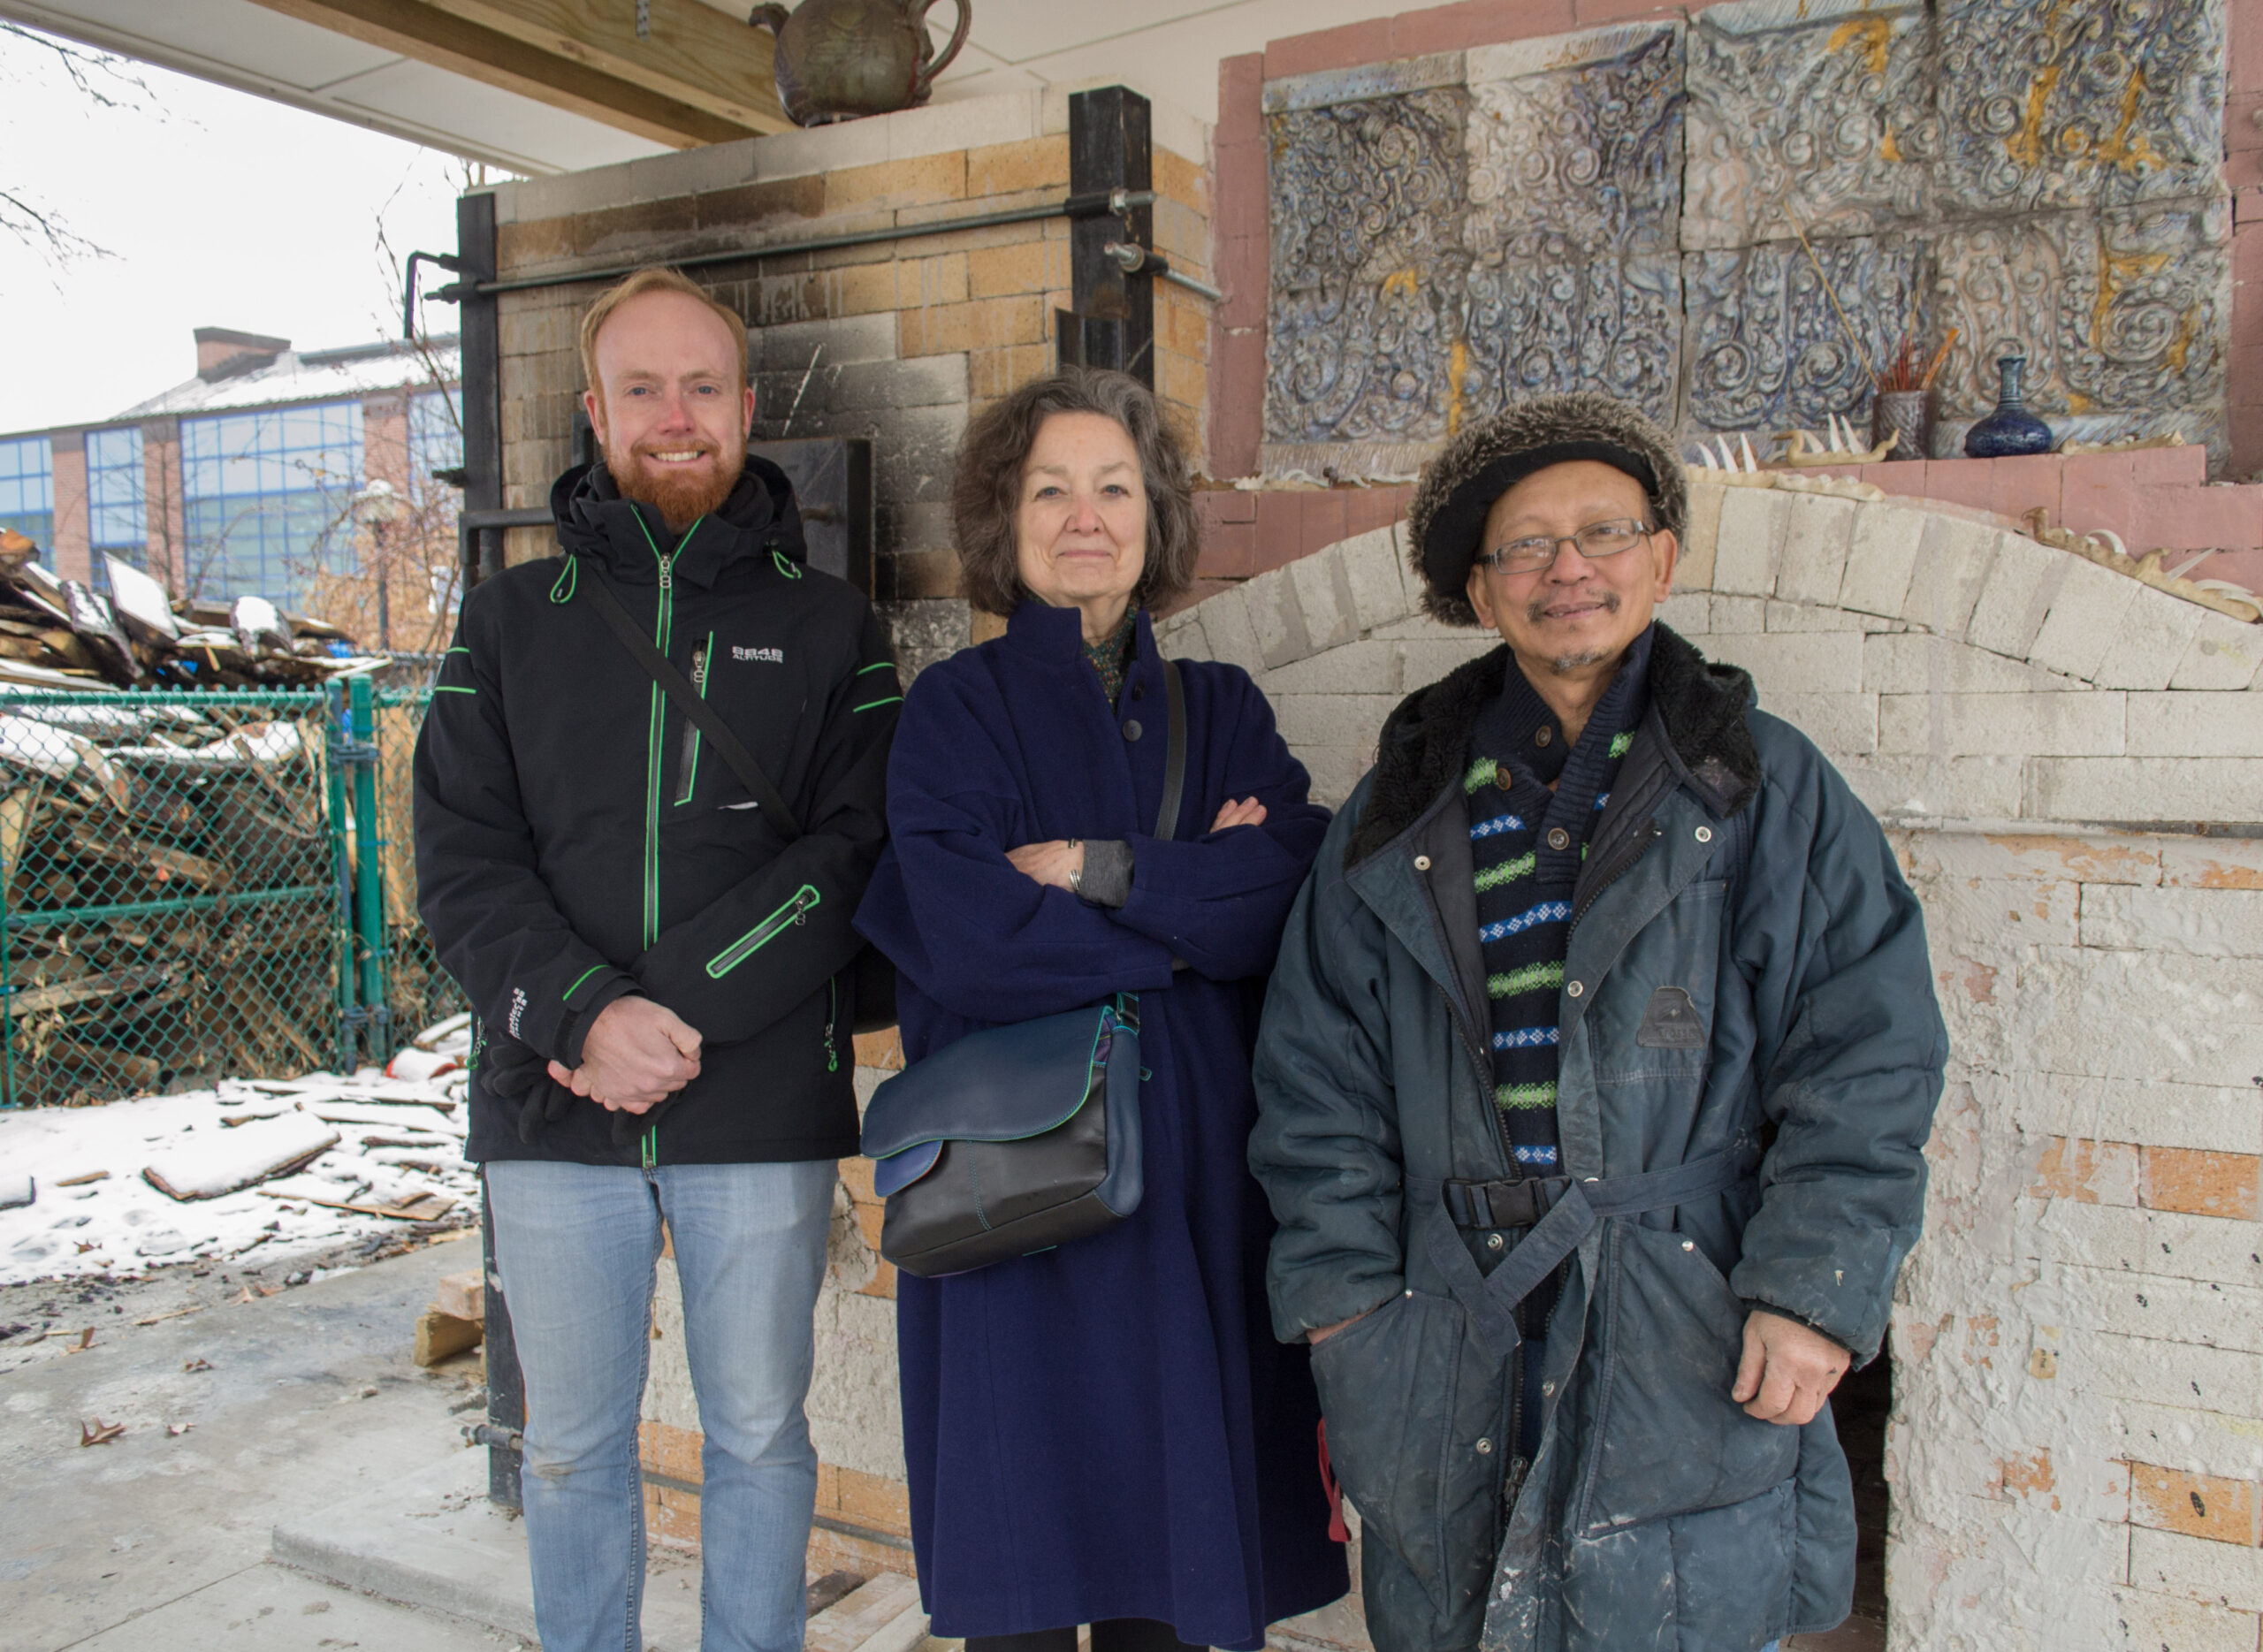 A visit to the kiln. Danny Eijsermans, Louise Cort, and Yary Livan.